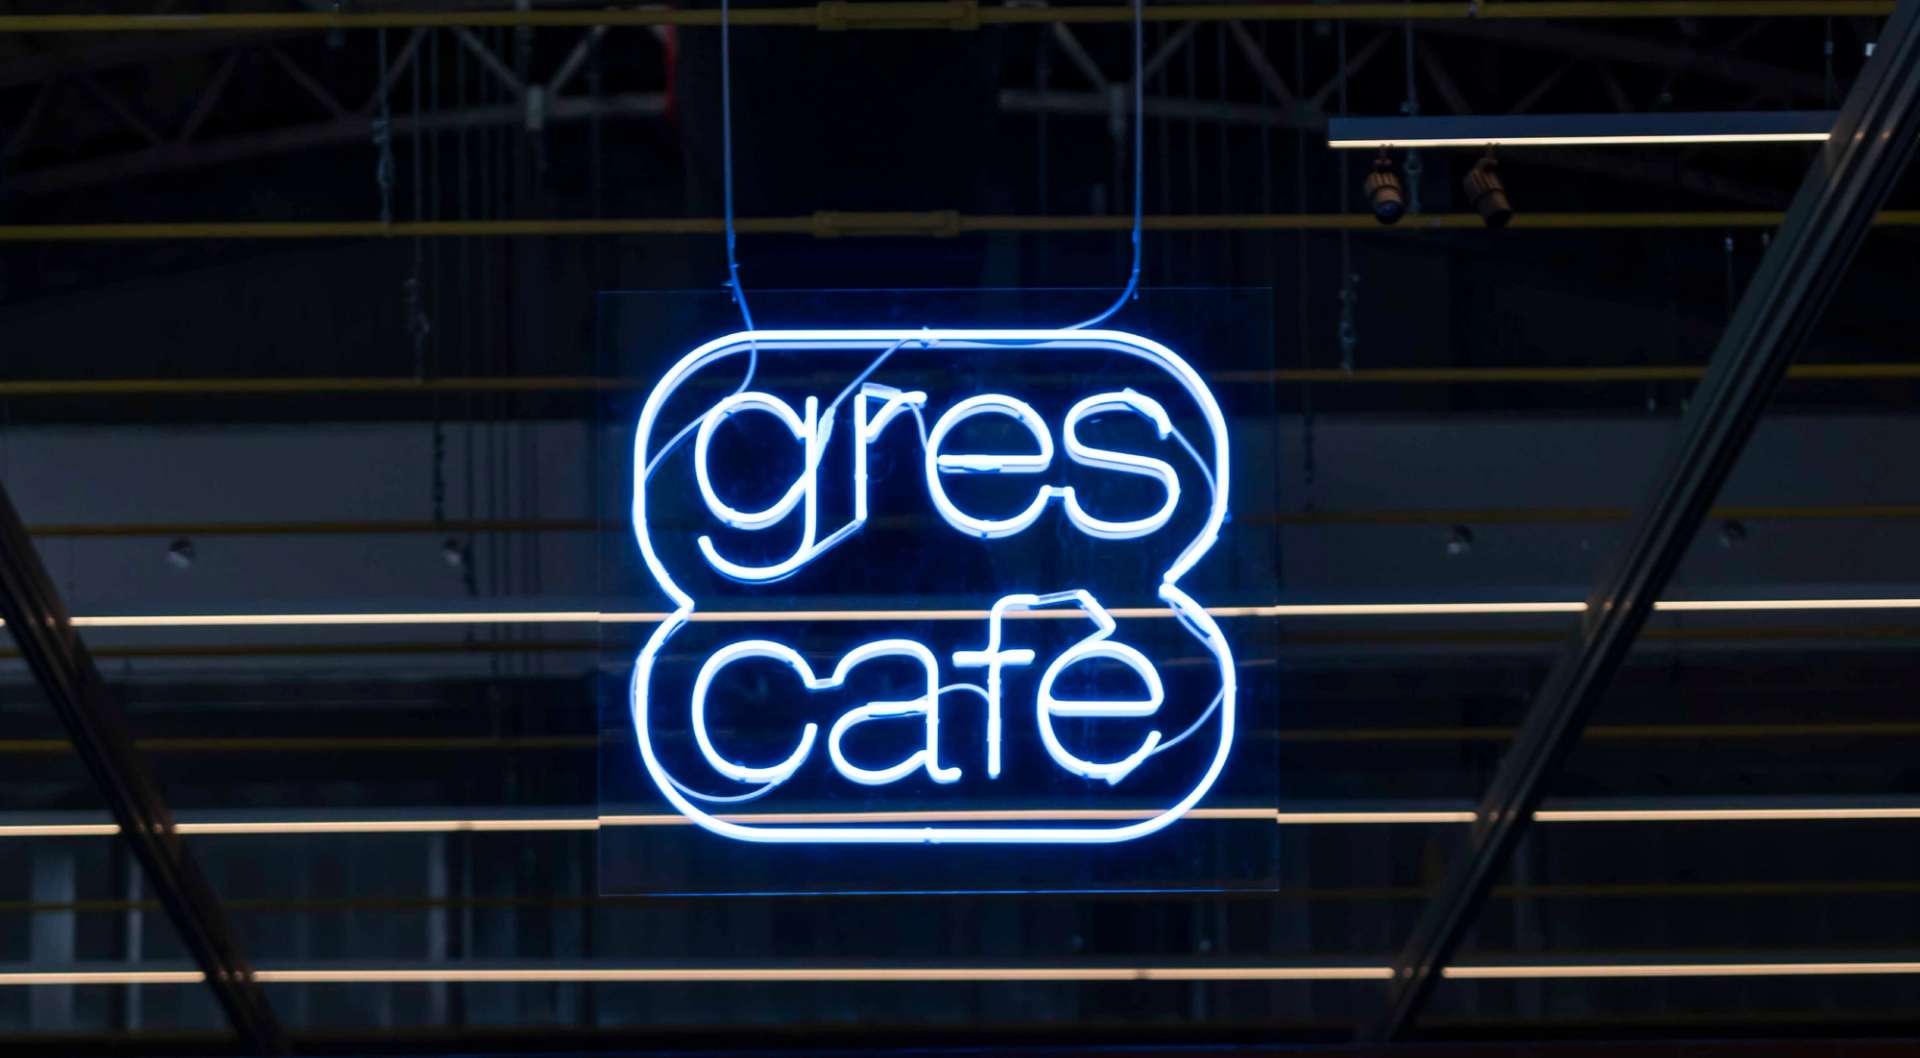 detail of the counter of gres cafè